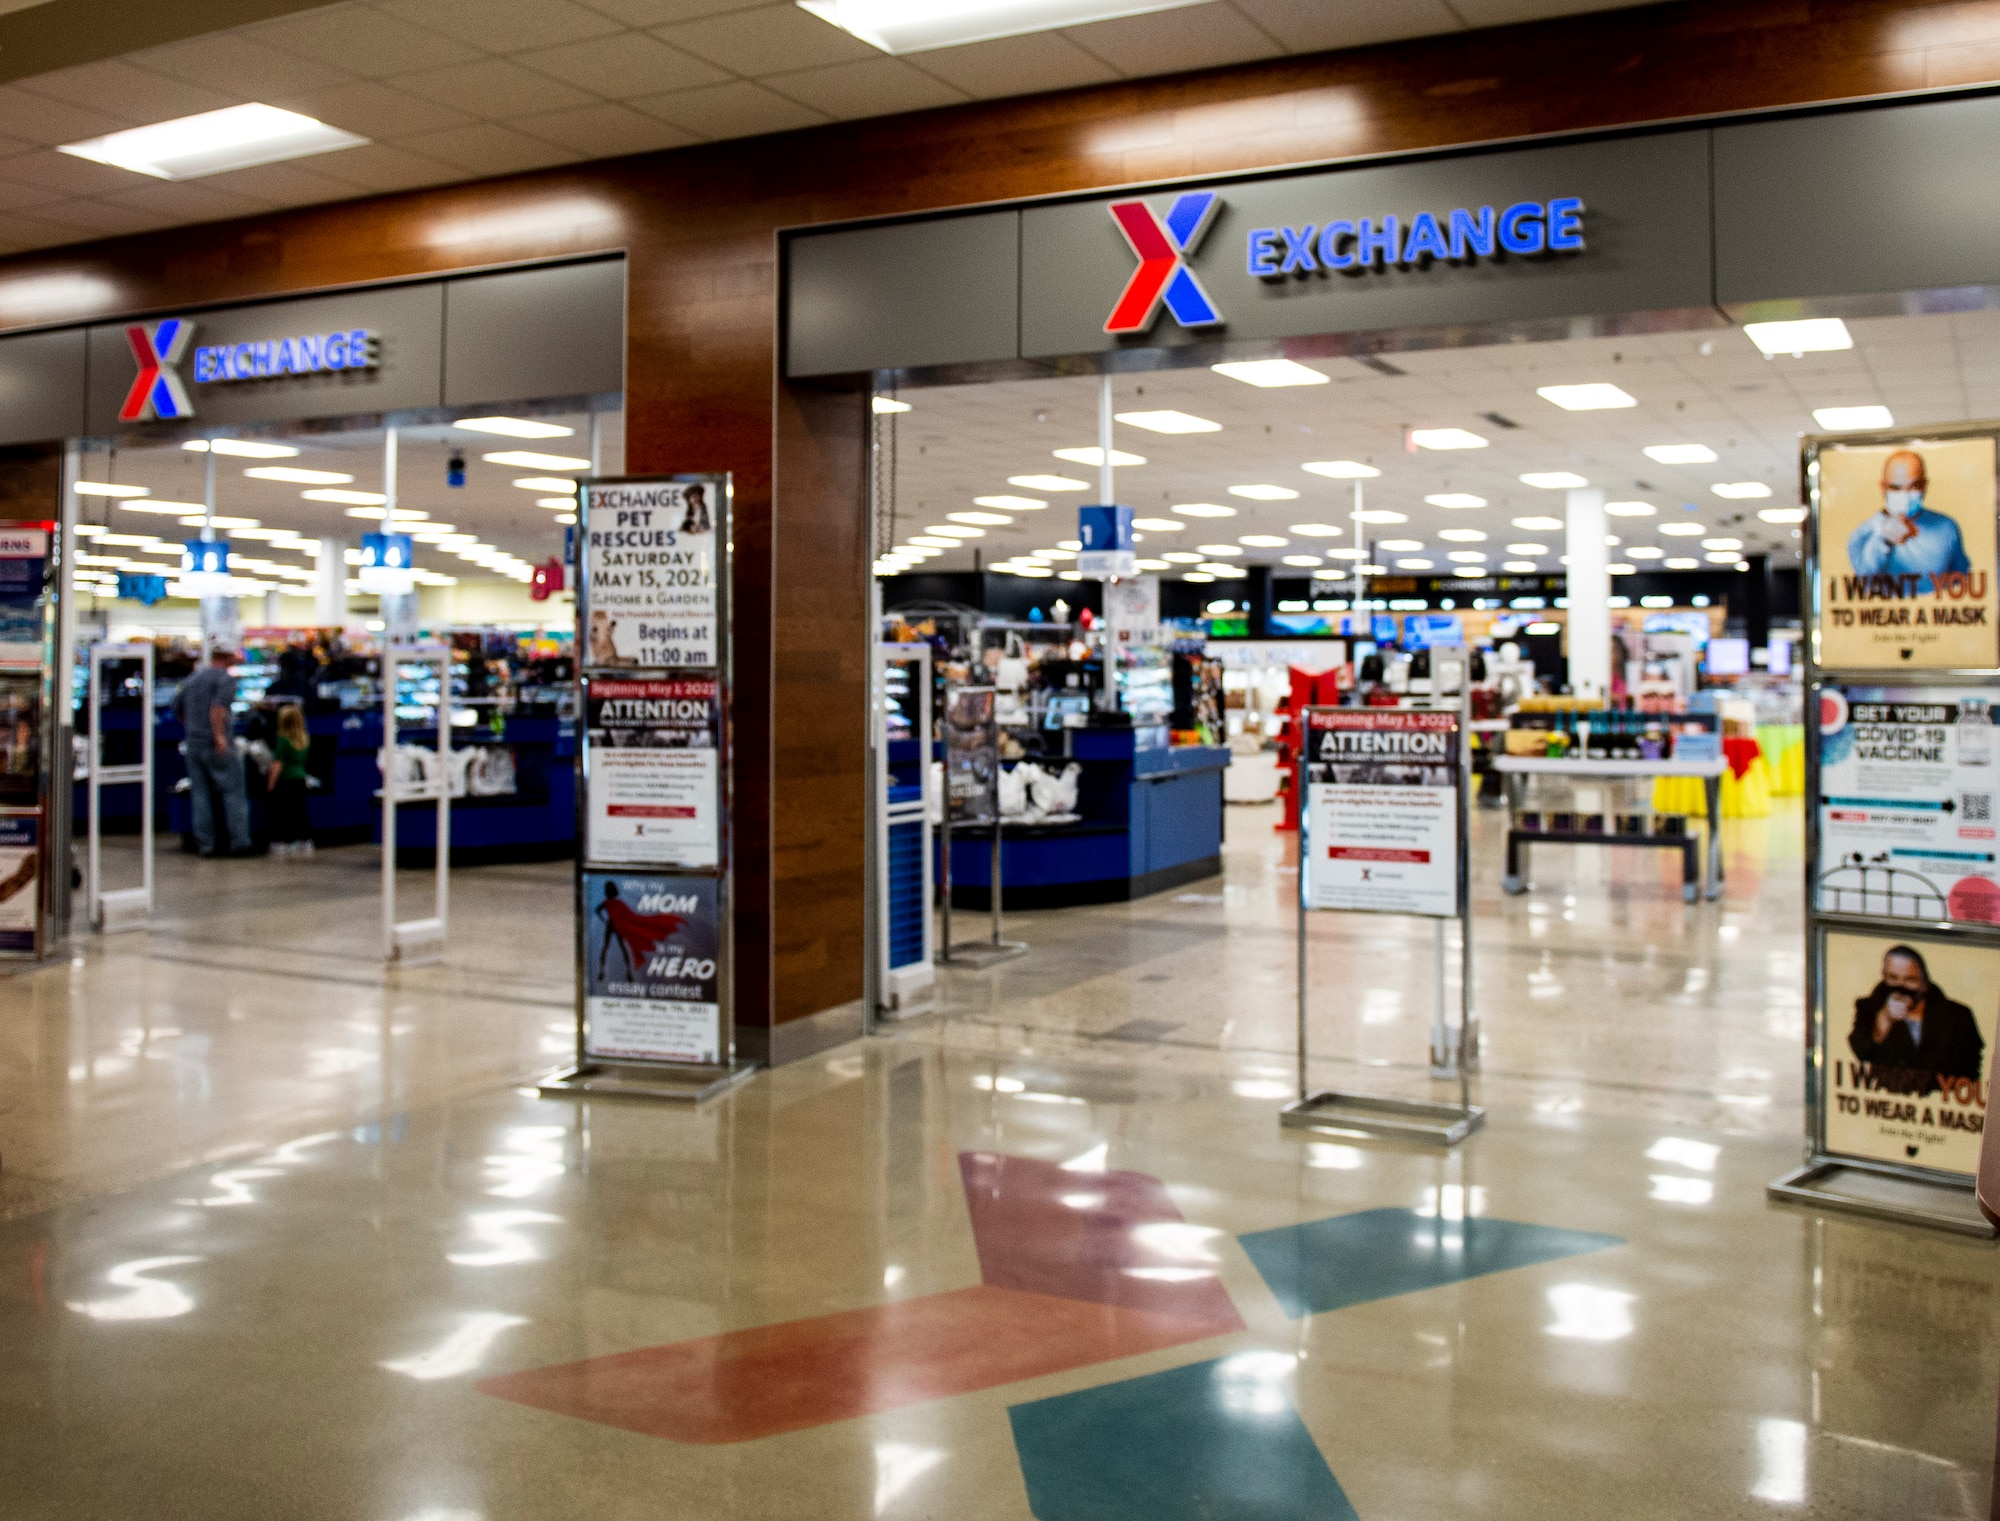 Effecting May 1, 2021 DoD civilian employees are able to shop at the base exchange, use Army & Air Force Exchange services such as the barbershop and salon, and use the AAFES online Mall. However, civilians may not purchase alcohol, tobacco or military clothing uniform items. (U.S. Air Force photo by Wesley Farnsworth)